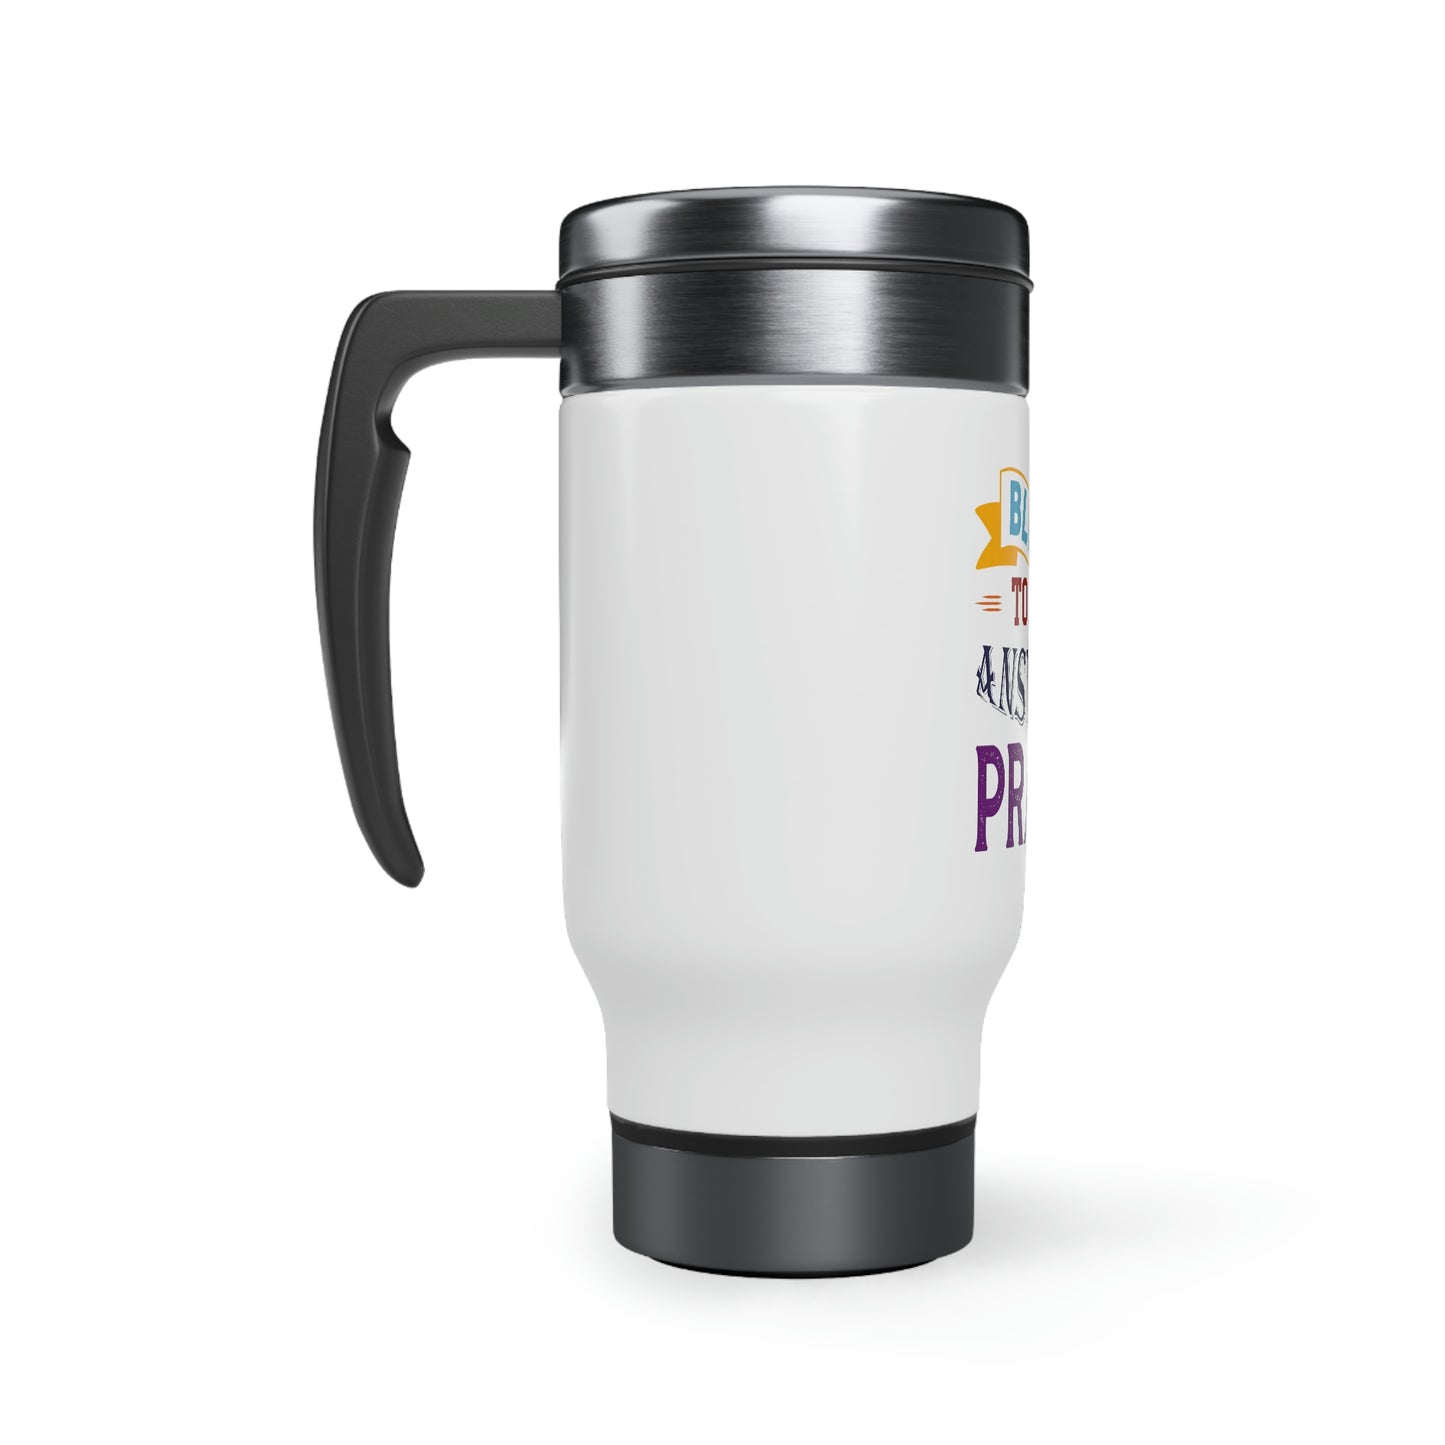 Blessed To Be An Answered Prayer  Travel Mug with Handle, 14oz